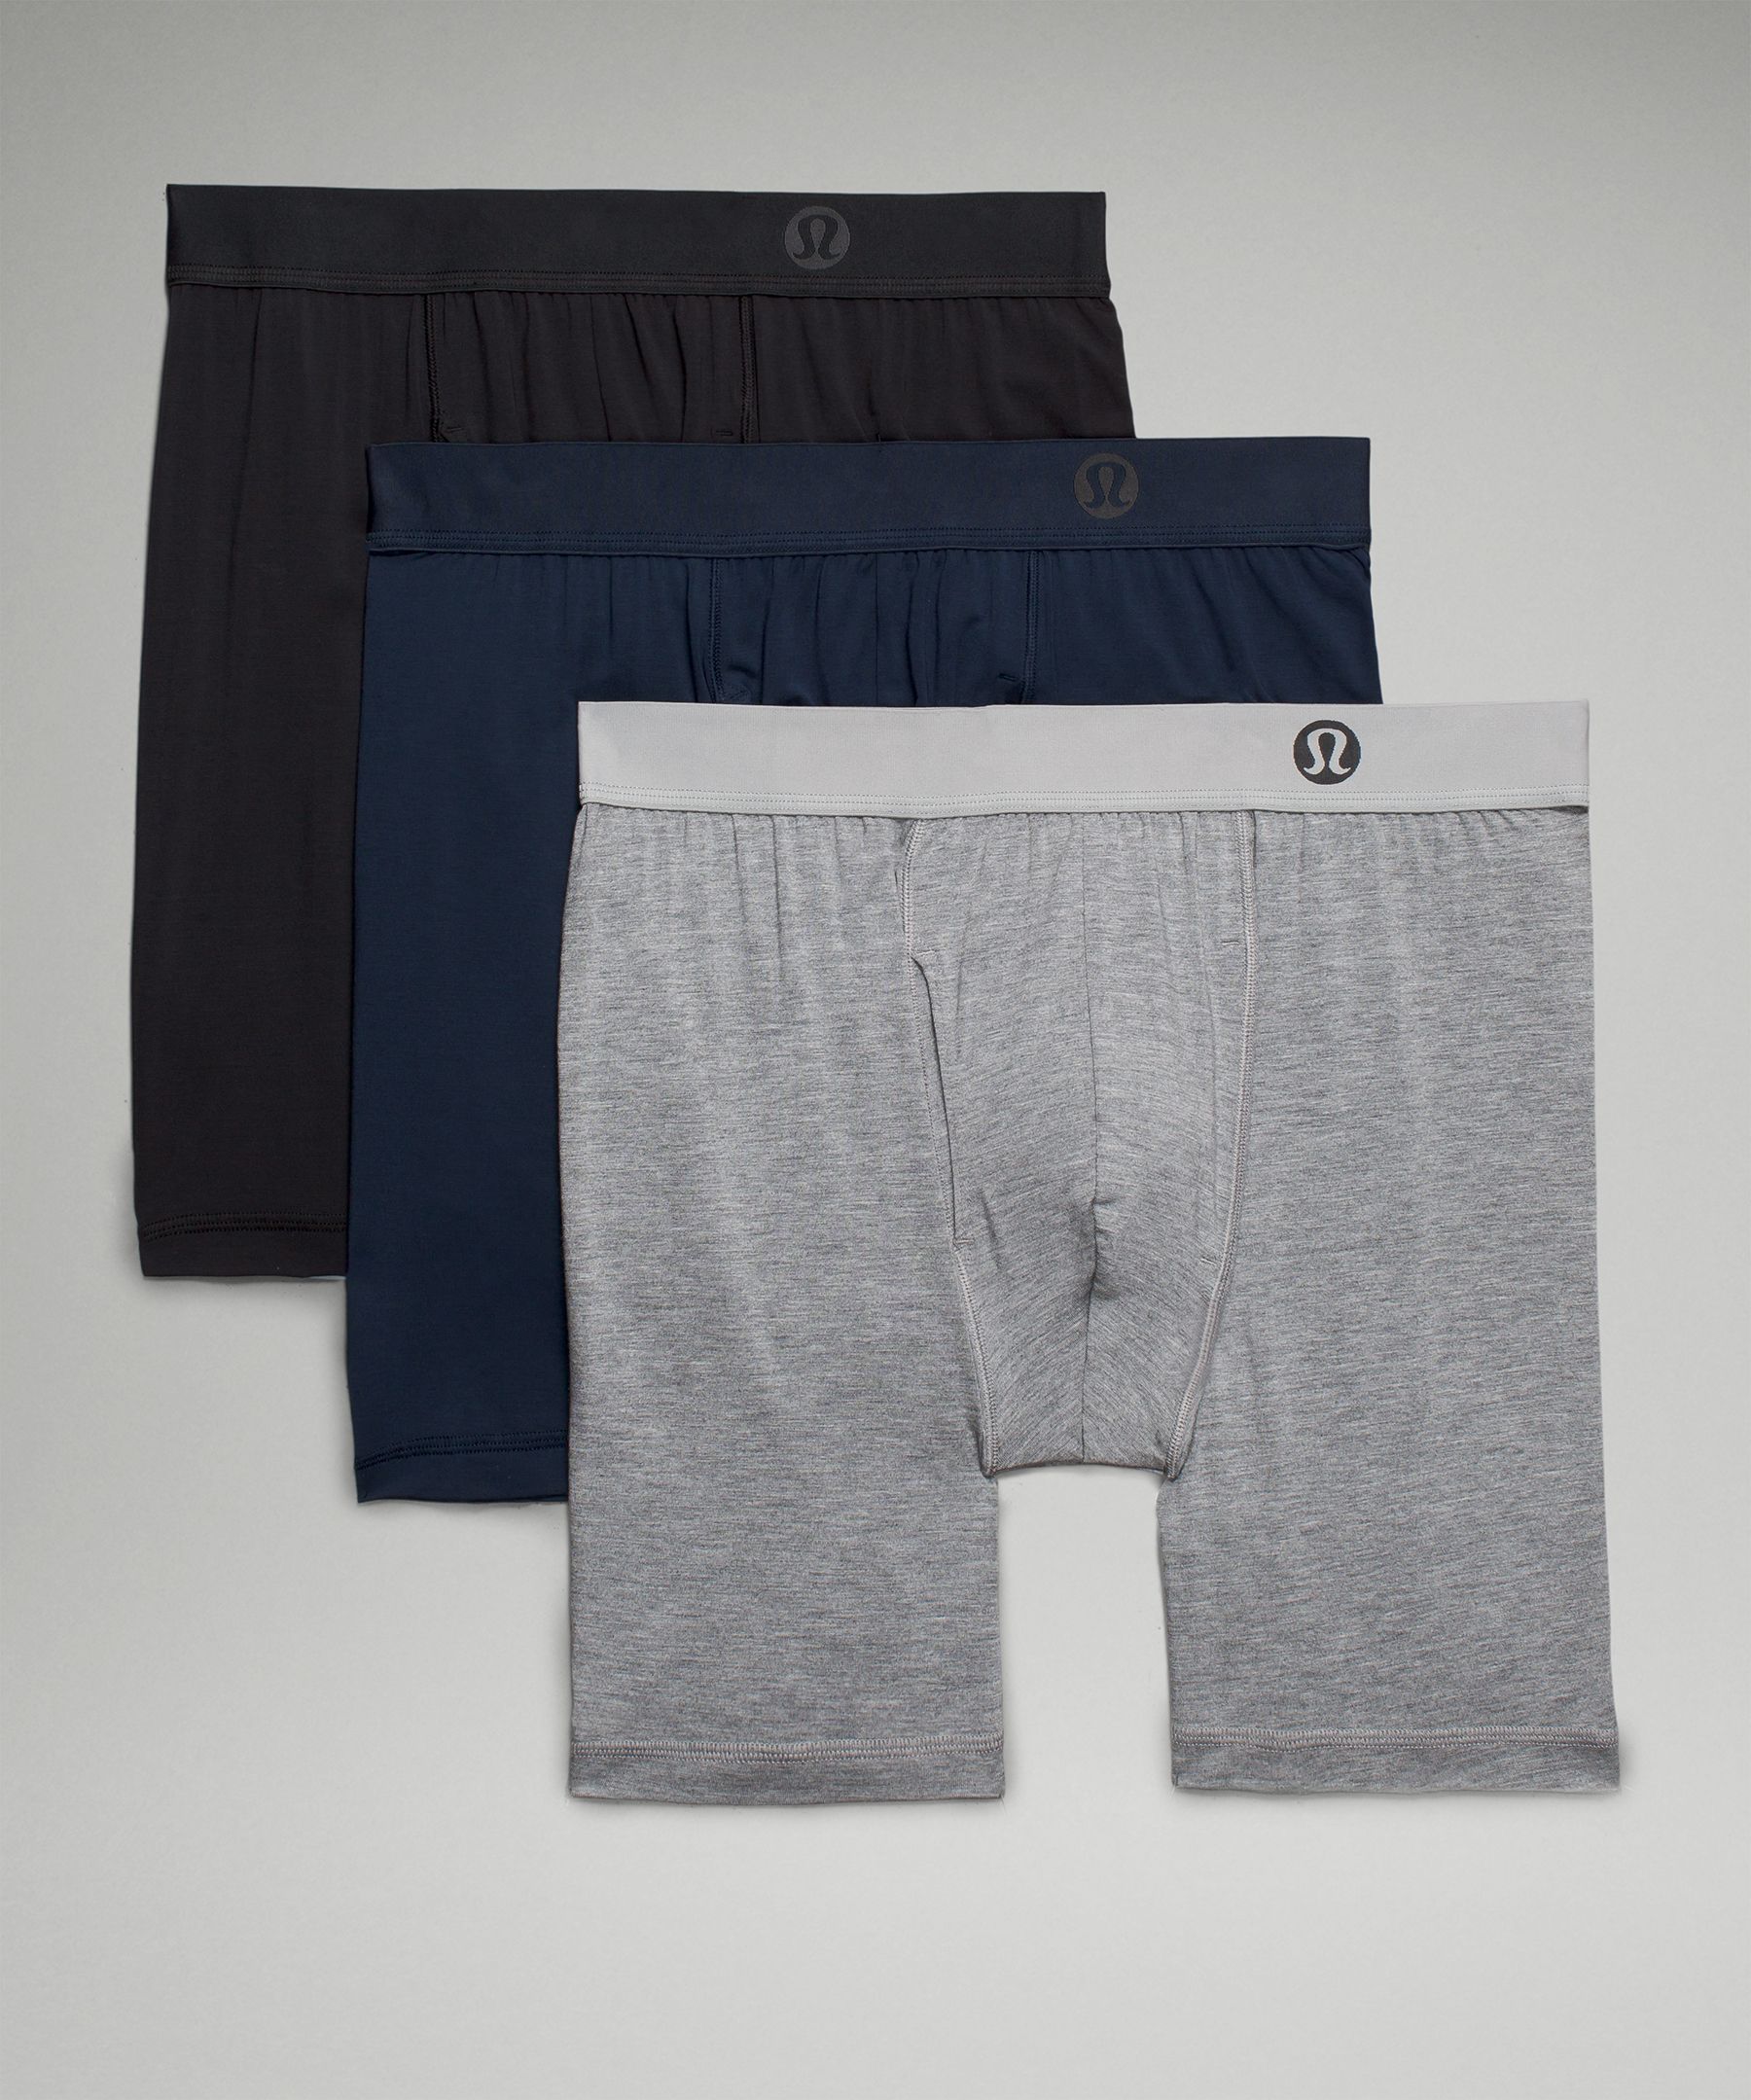 Lululemon Always In Motion Long Boxers With Fly 7" 3 Pack